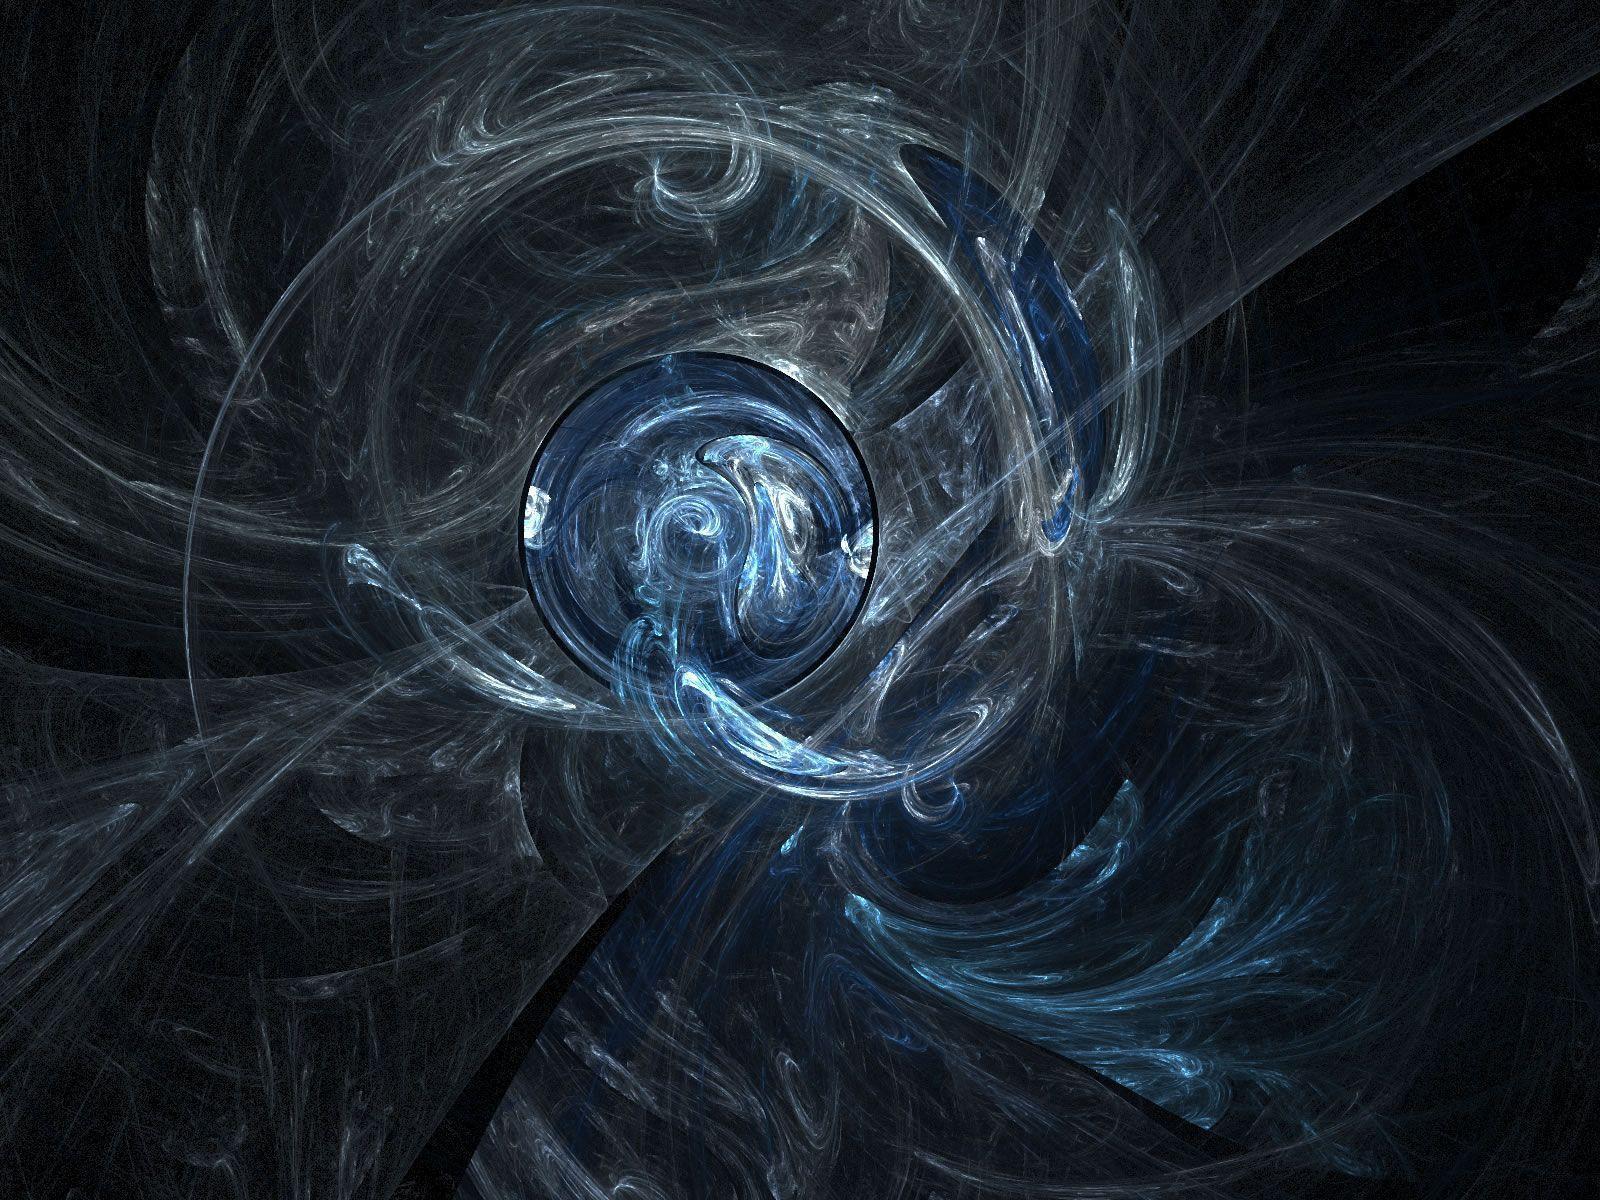 Blue Fractal Wallpaper. Daily inspiration art photo, picture